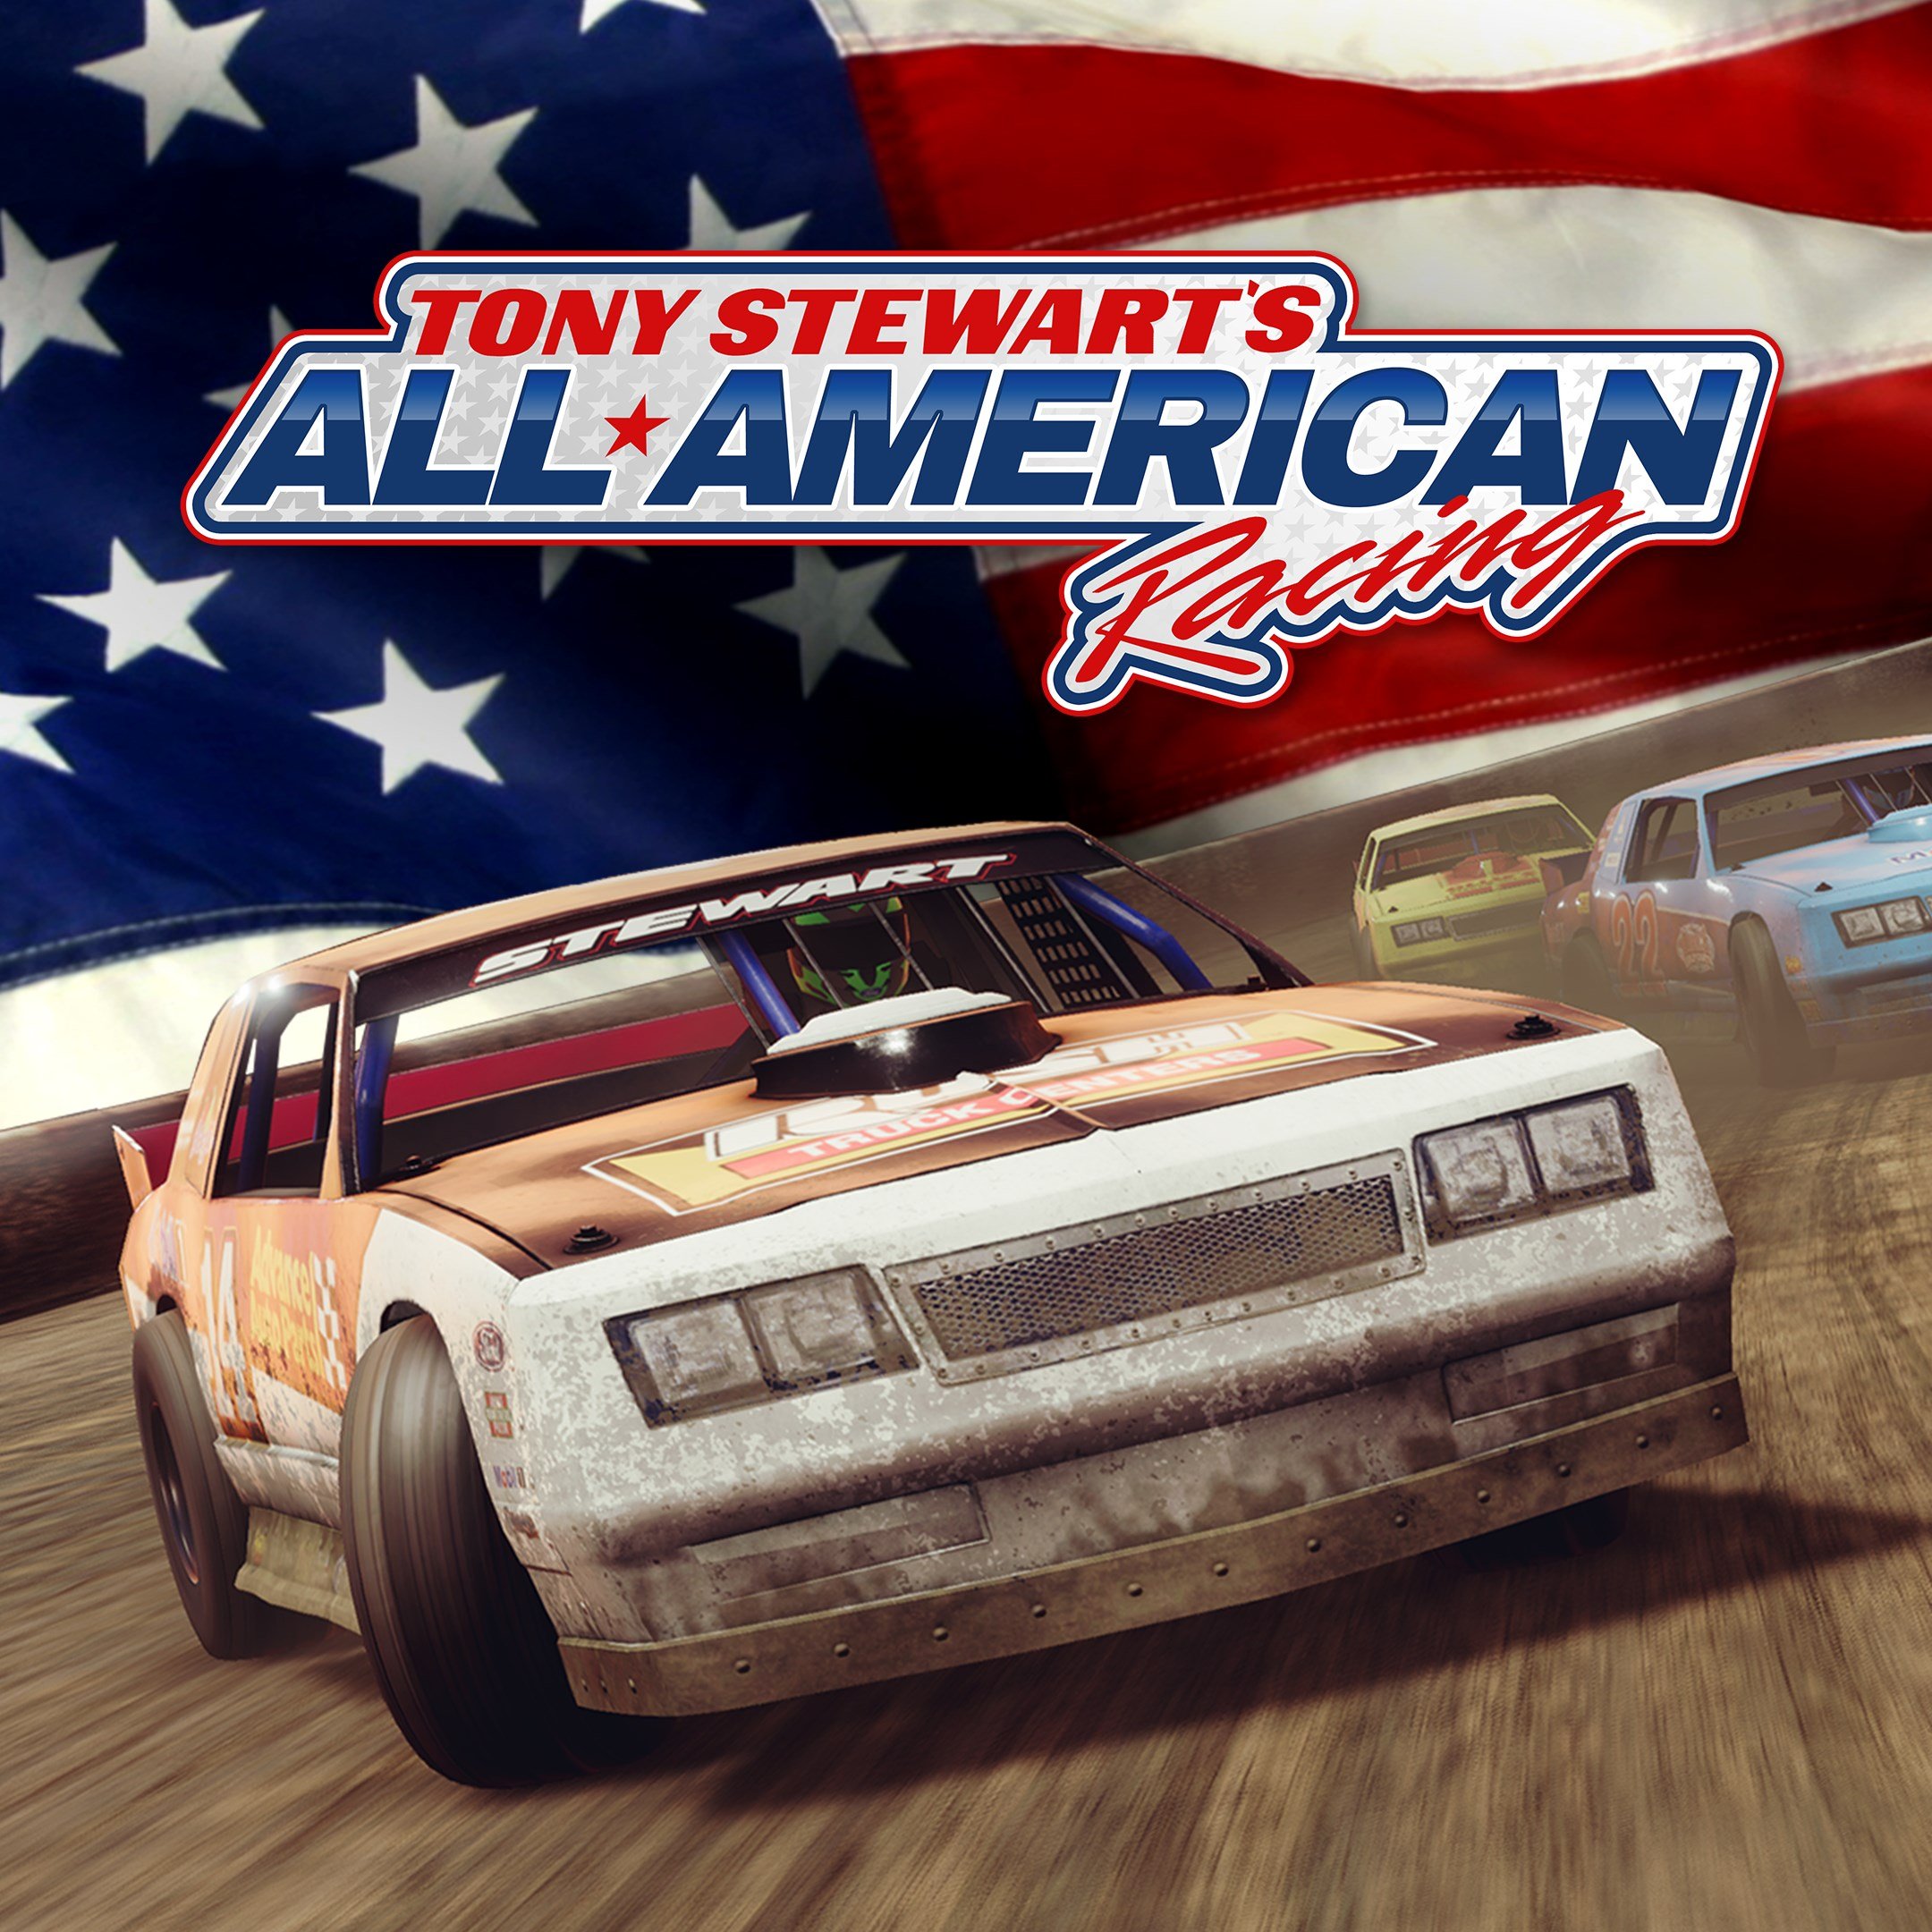 Boxart for Tony Stewart's All-American Racing